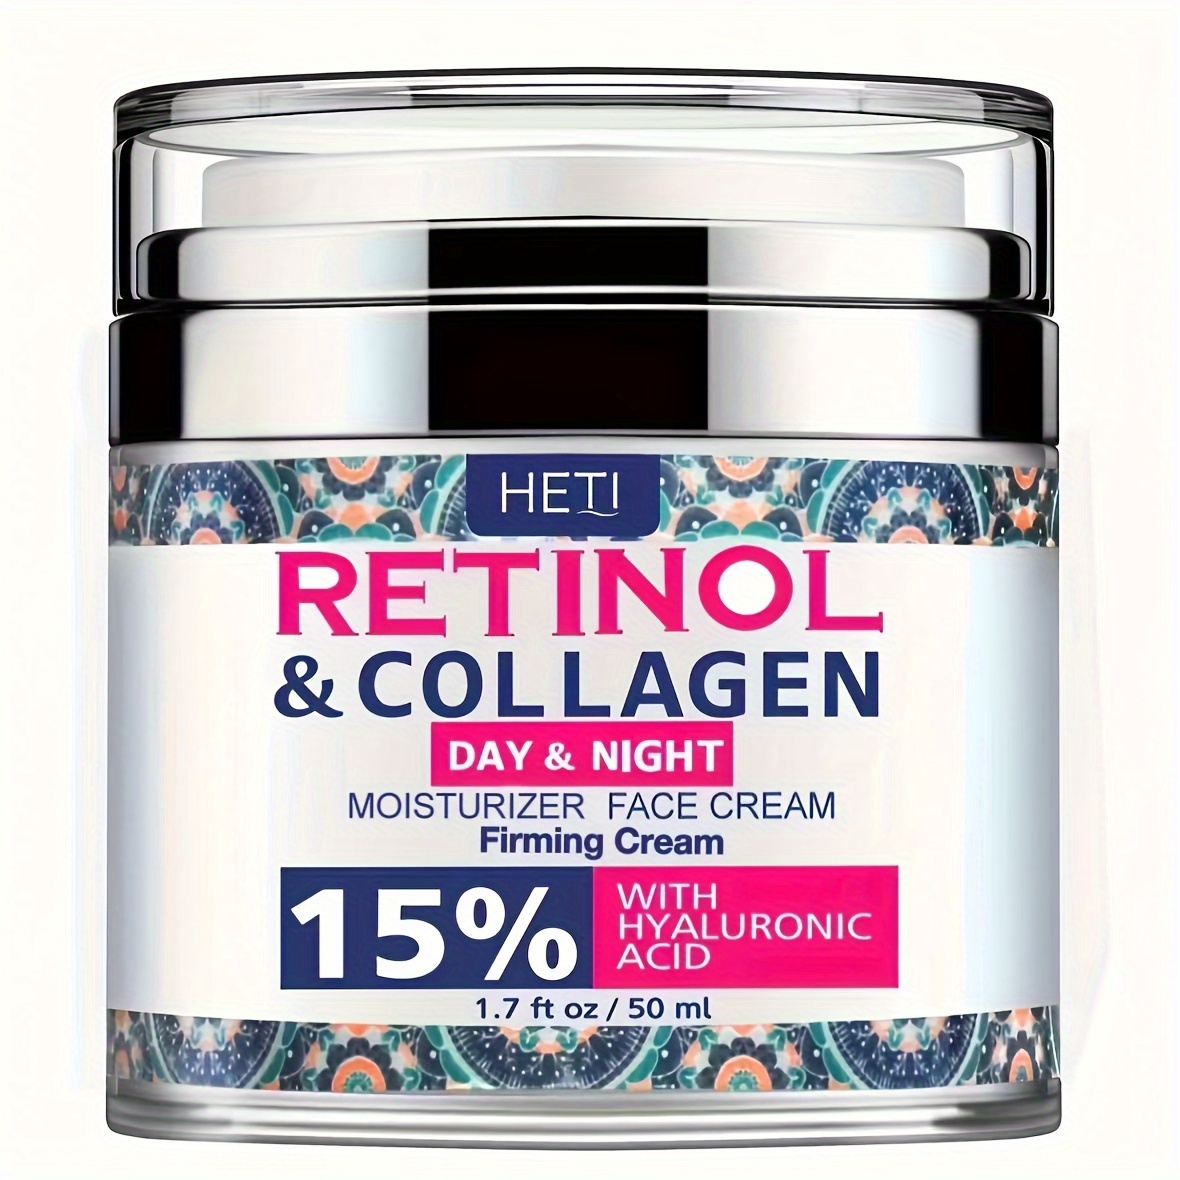 

50g Retinol & Collagen Cream With Vitamin E, Hyaluronic Acid, For Face, Firming And Moisturizing Day And Night Cream Available For Men And Women